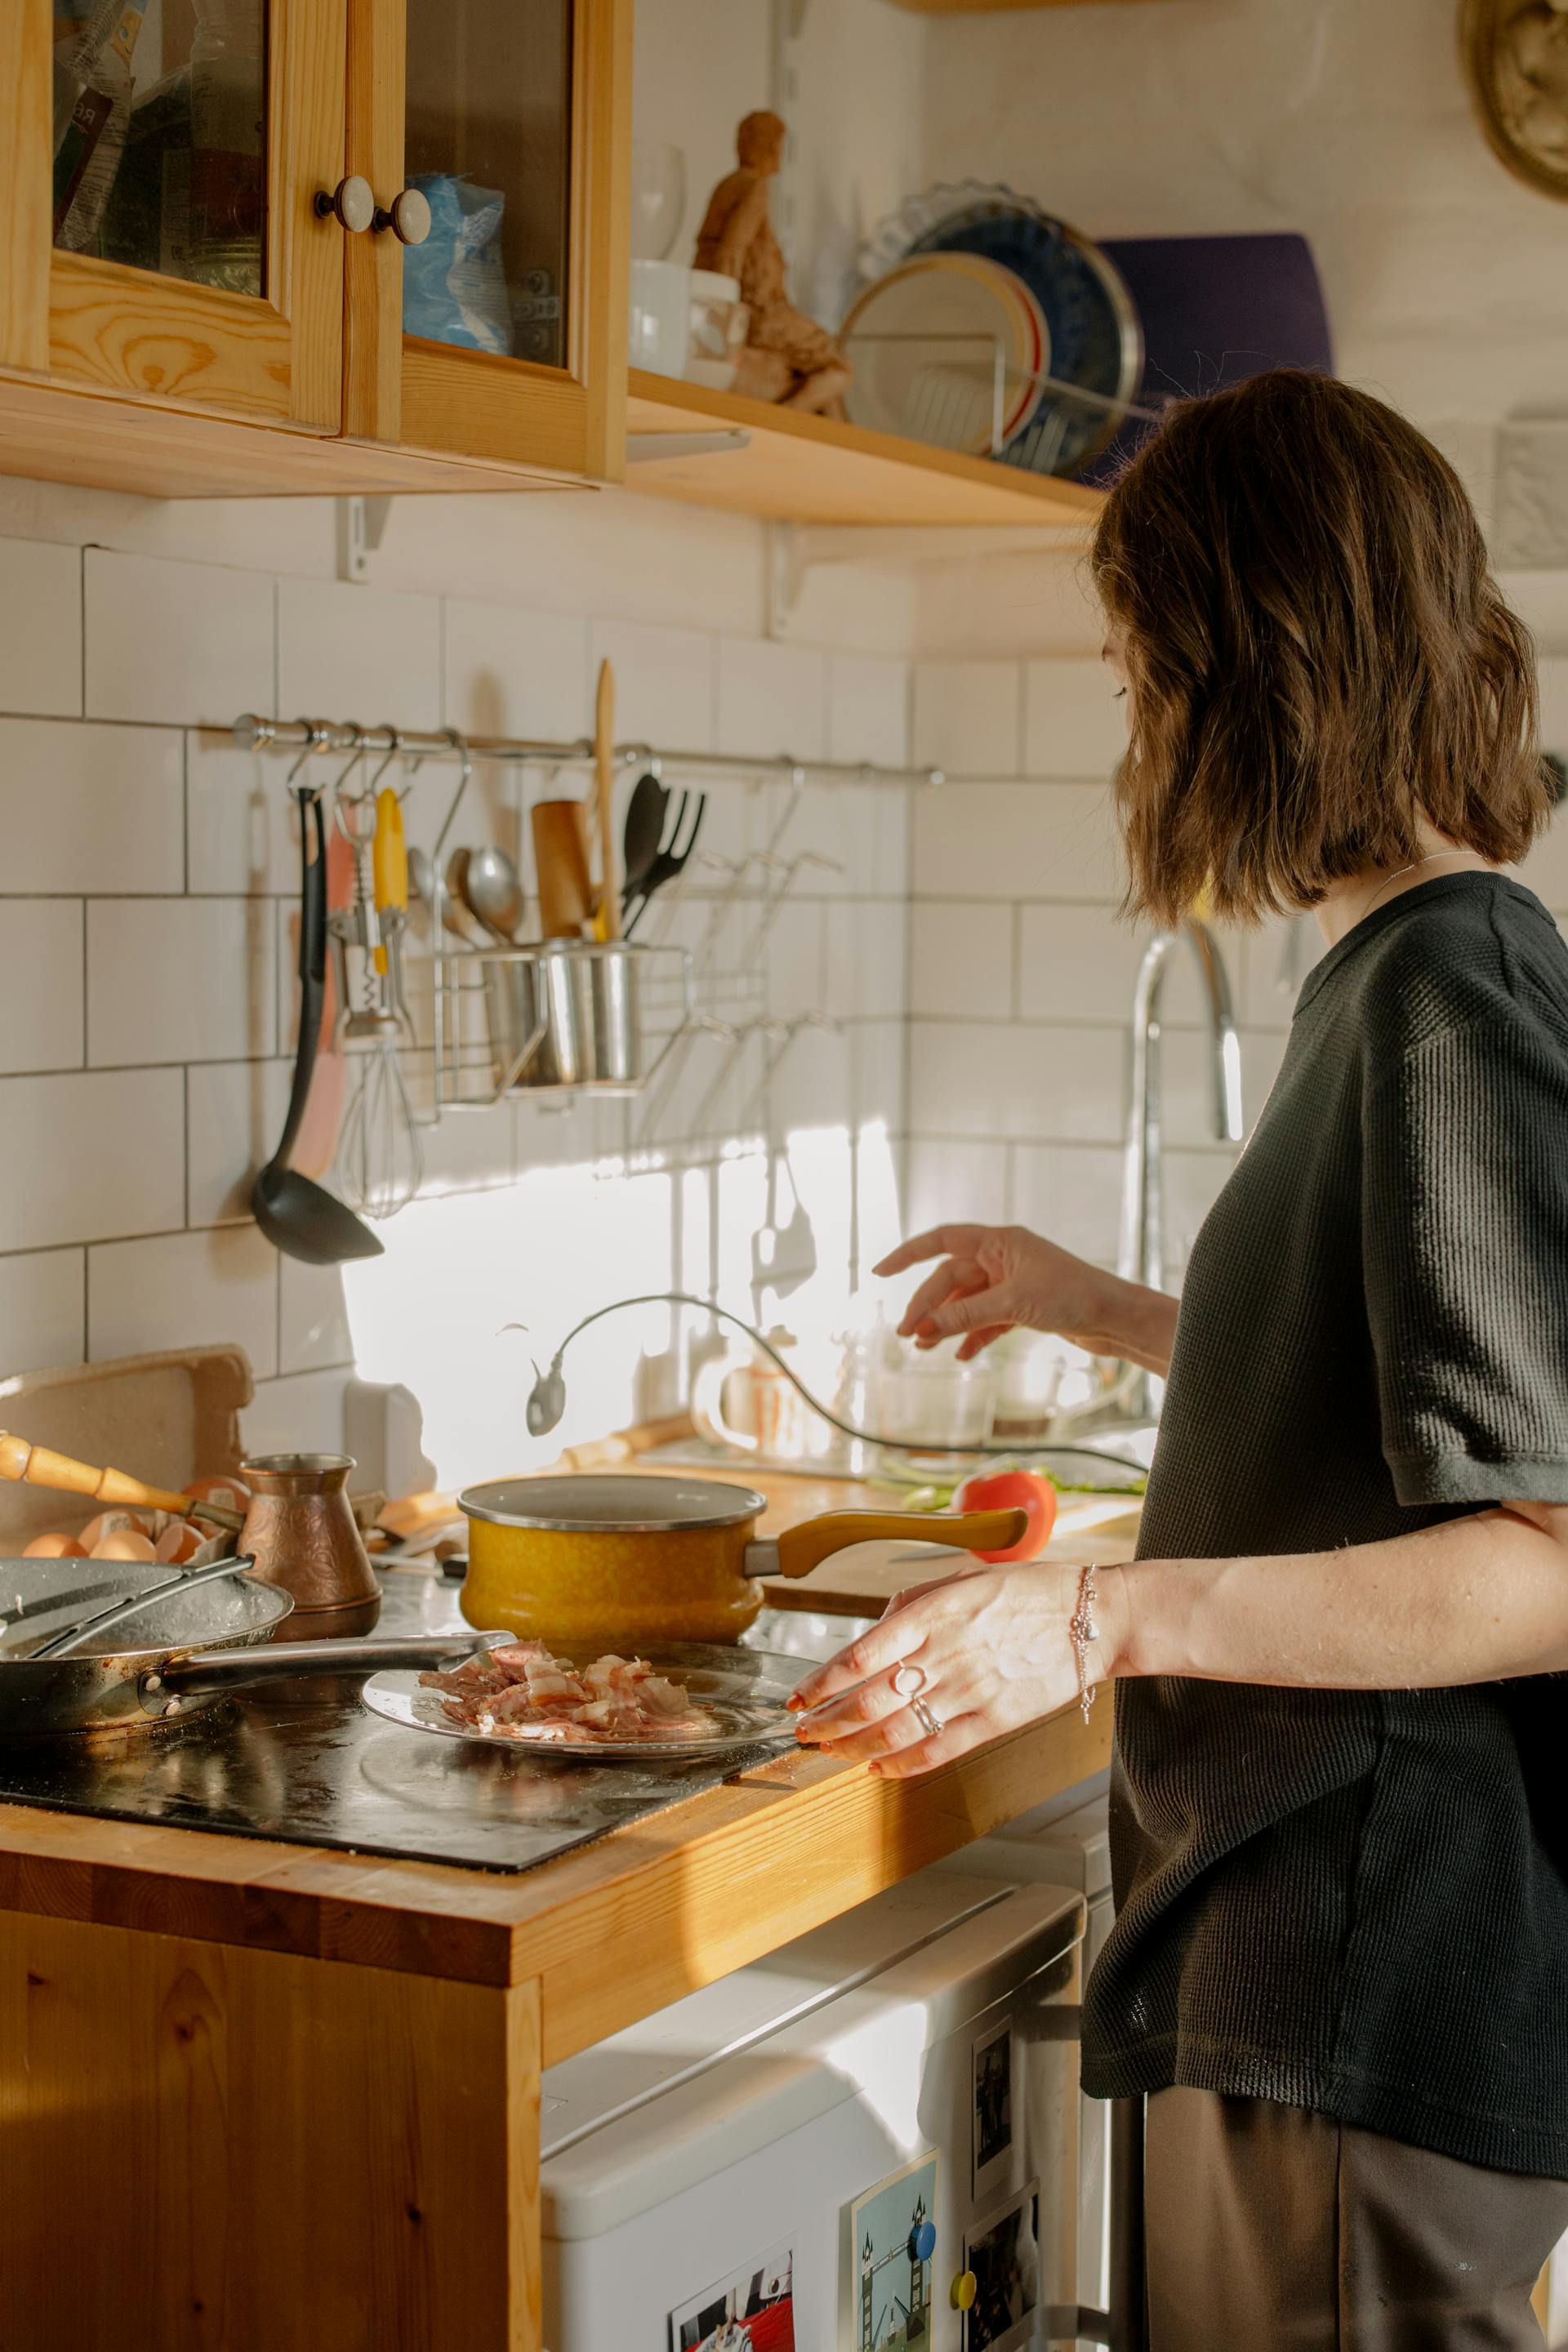 A person making breakfast | Source: Pexels